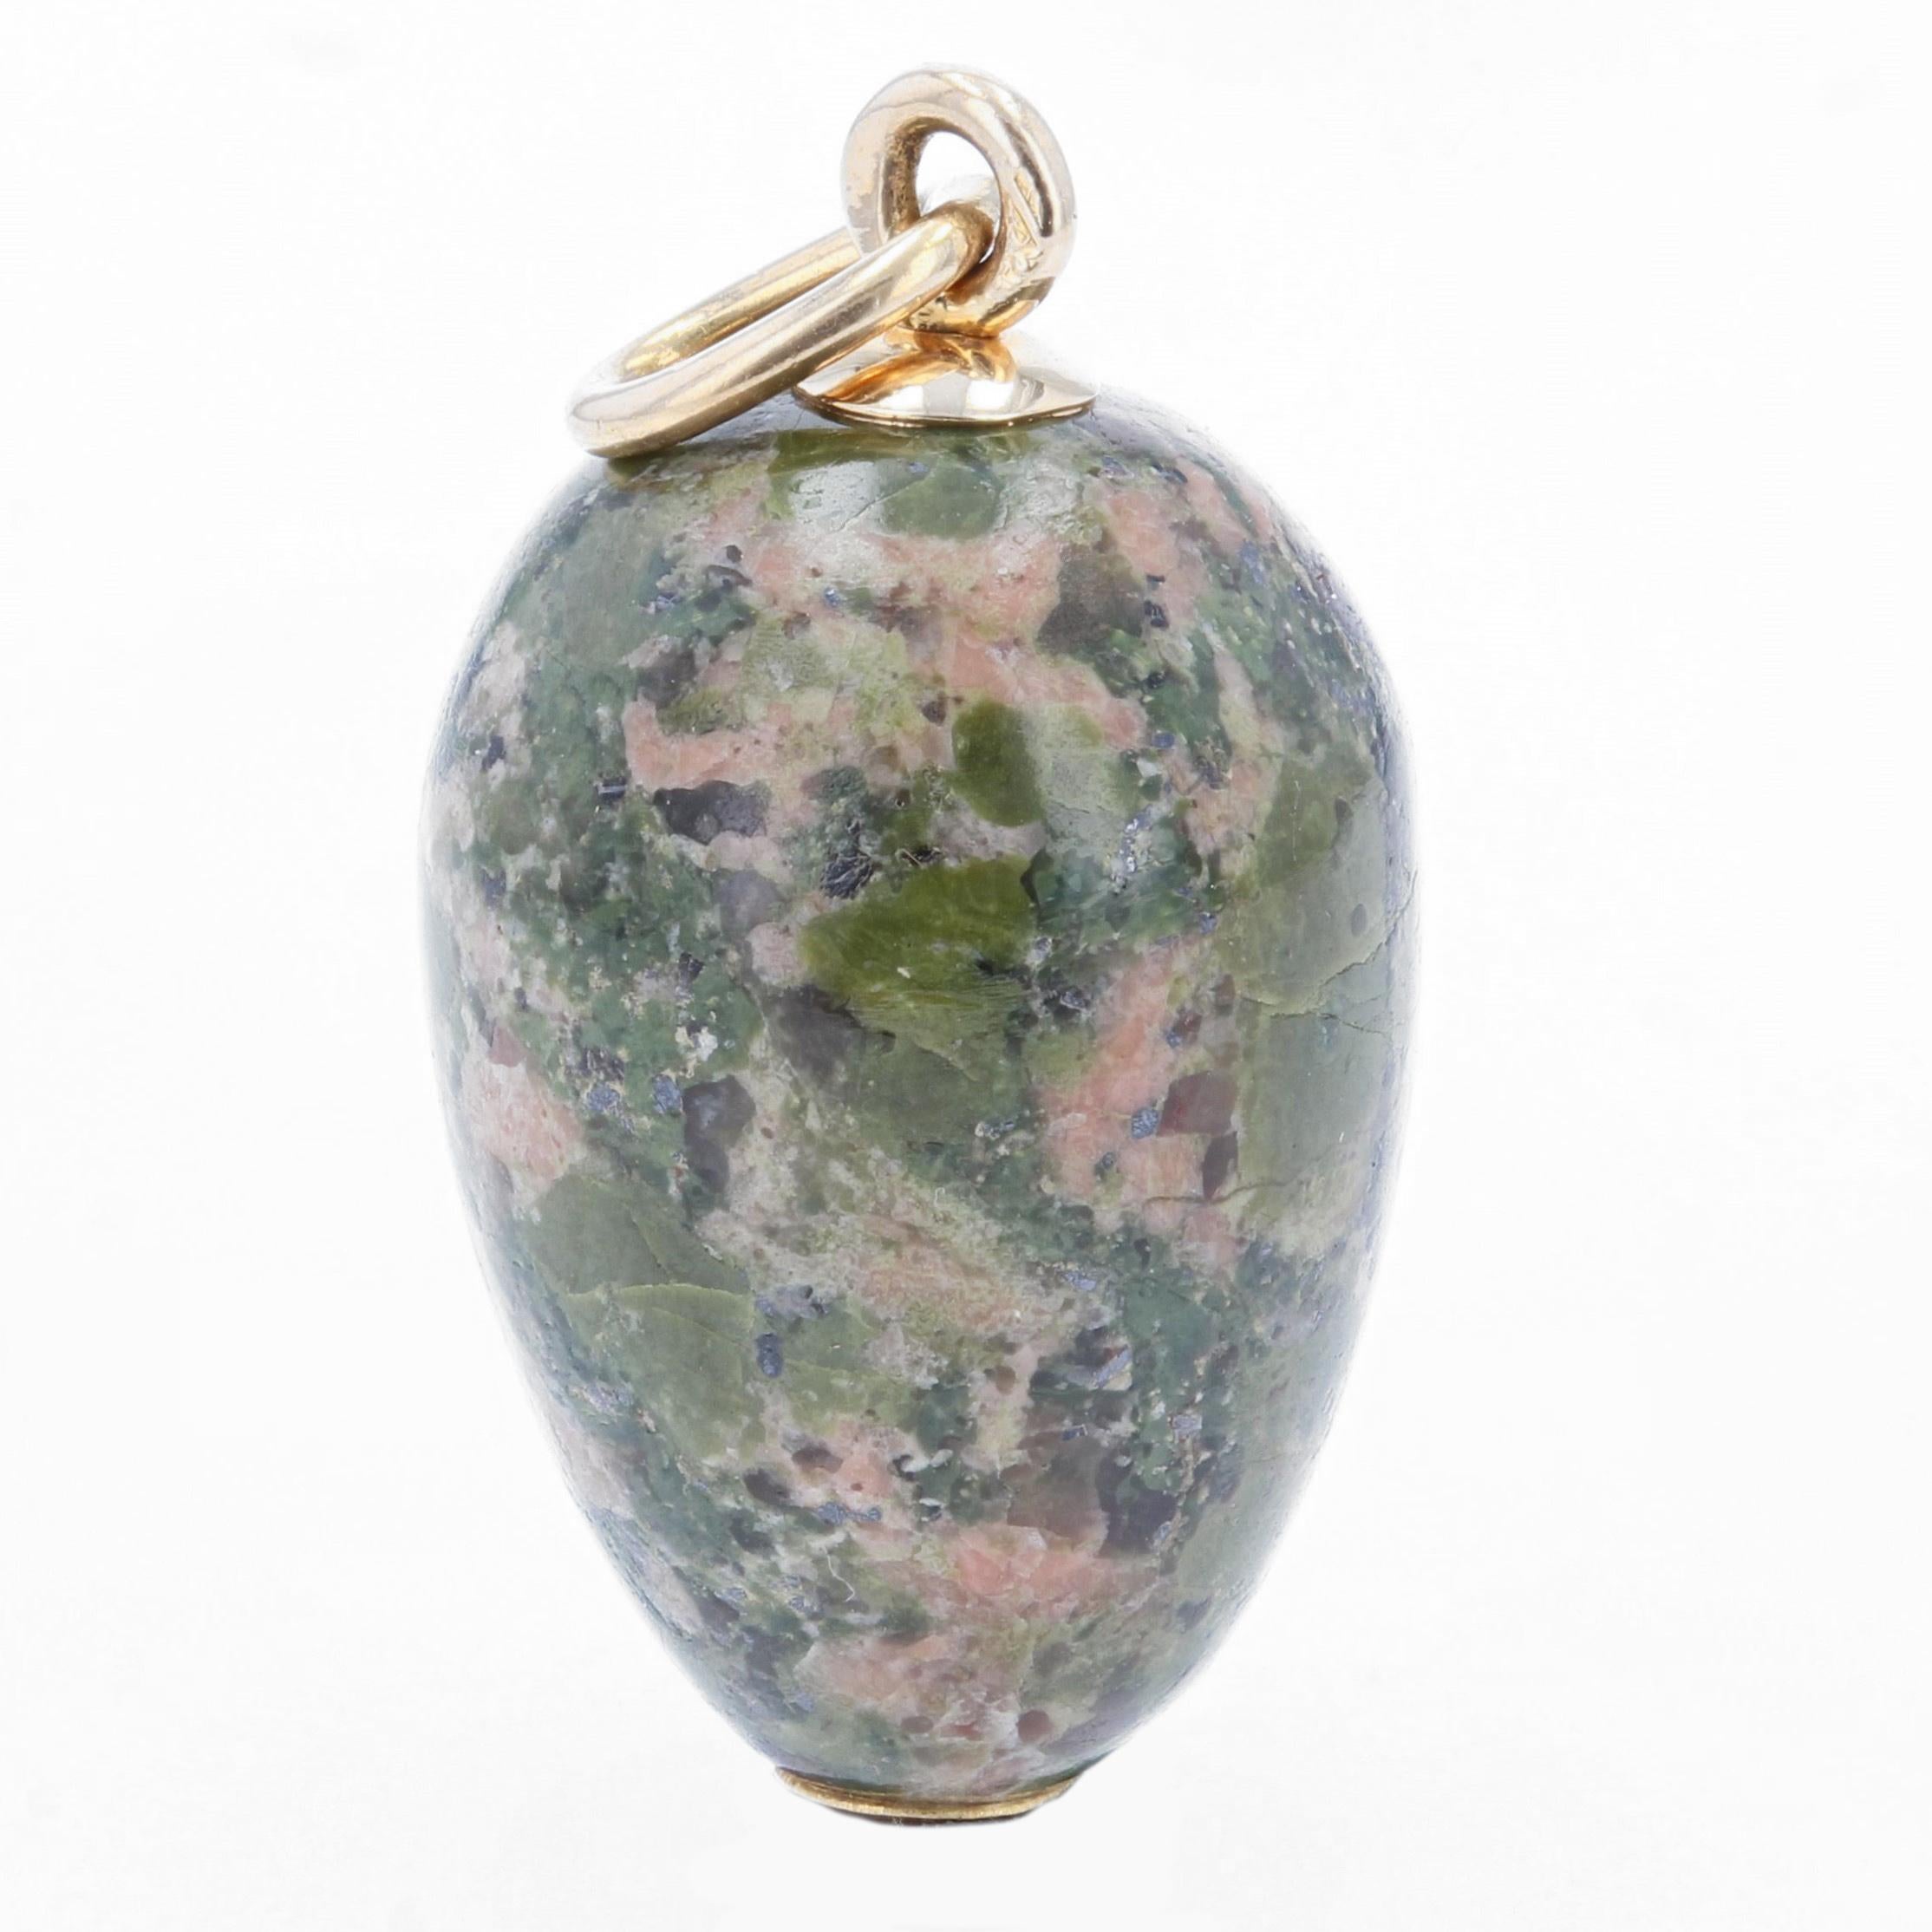 Pendant in 18 karat yellow gold, eagle head hallmark.
Charming antique charm, it consists of a jasper egg- cut retained by a gold ring.
Height : 2.5 cm, width : 11 mm, thickness : 12.2 mm.
Total weight of the jewel : 4,6 g approximately.
Authentic